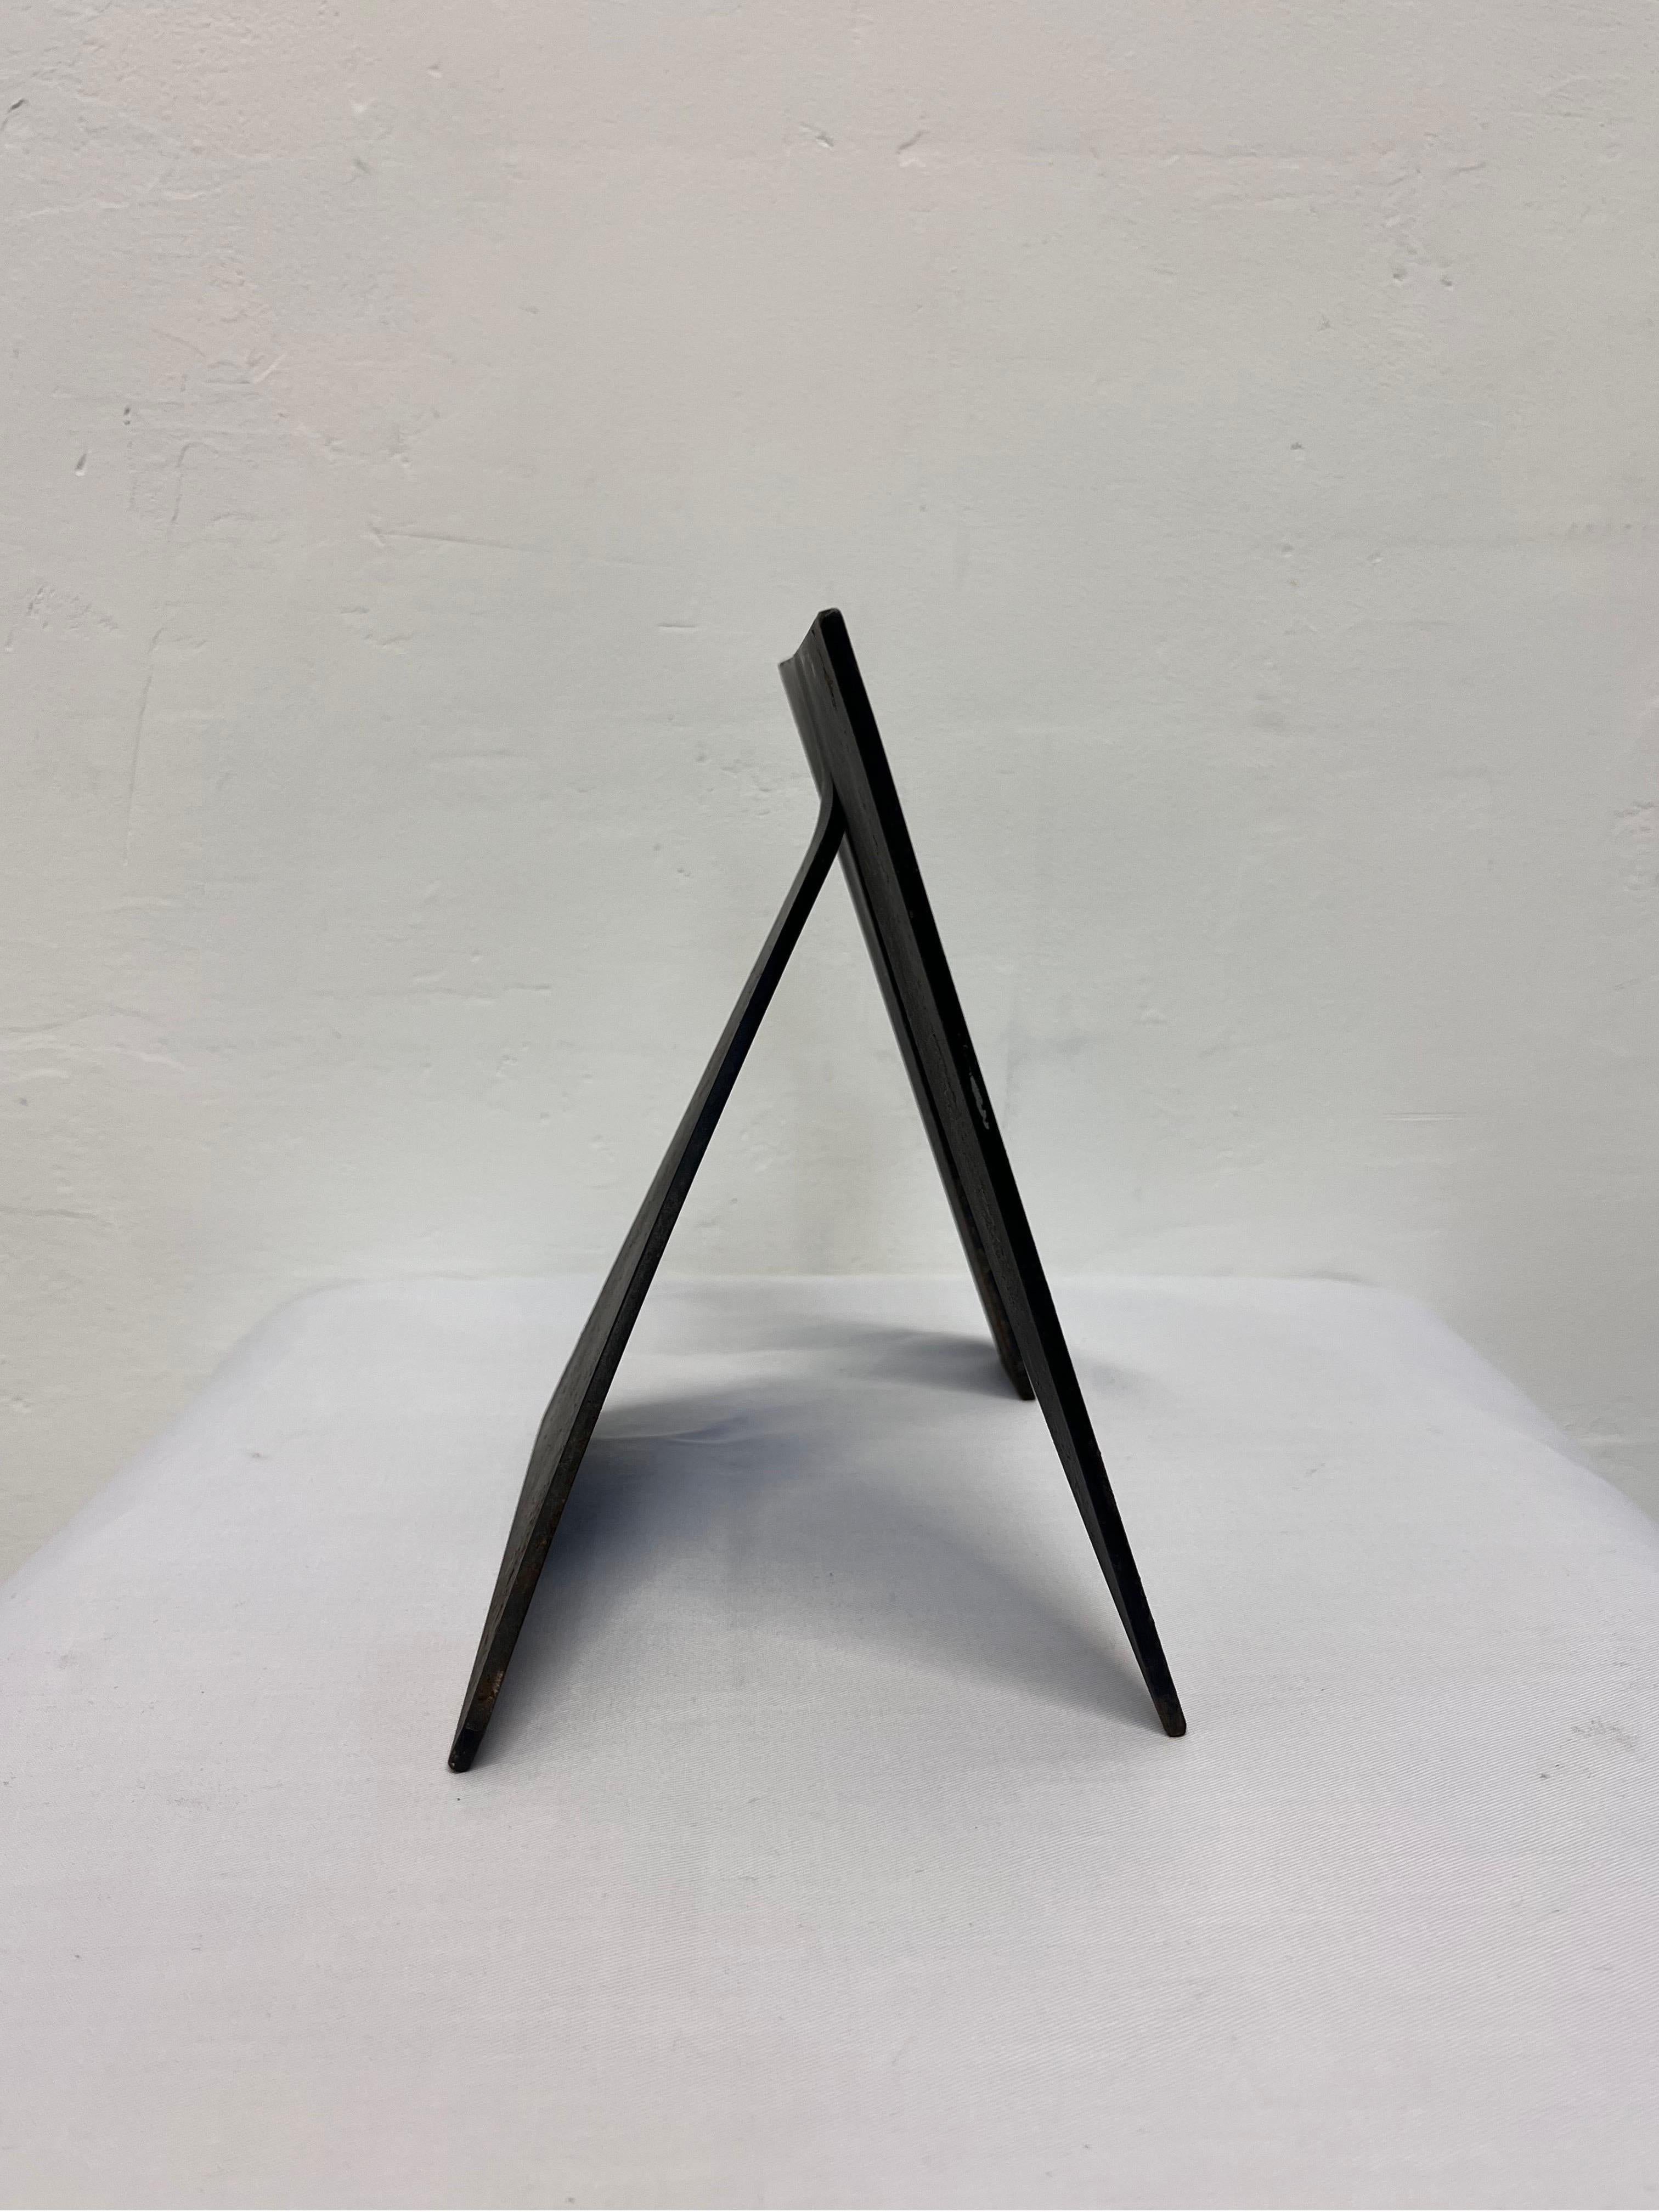 20th Century Brazilian Modern Black Steel Abstract Table Sculpture, 1980s For Sale